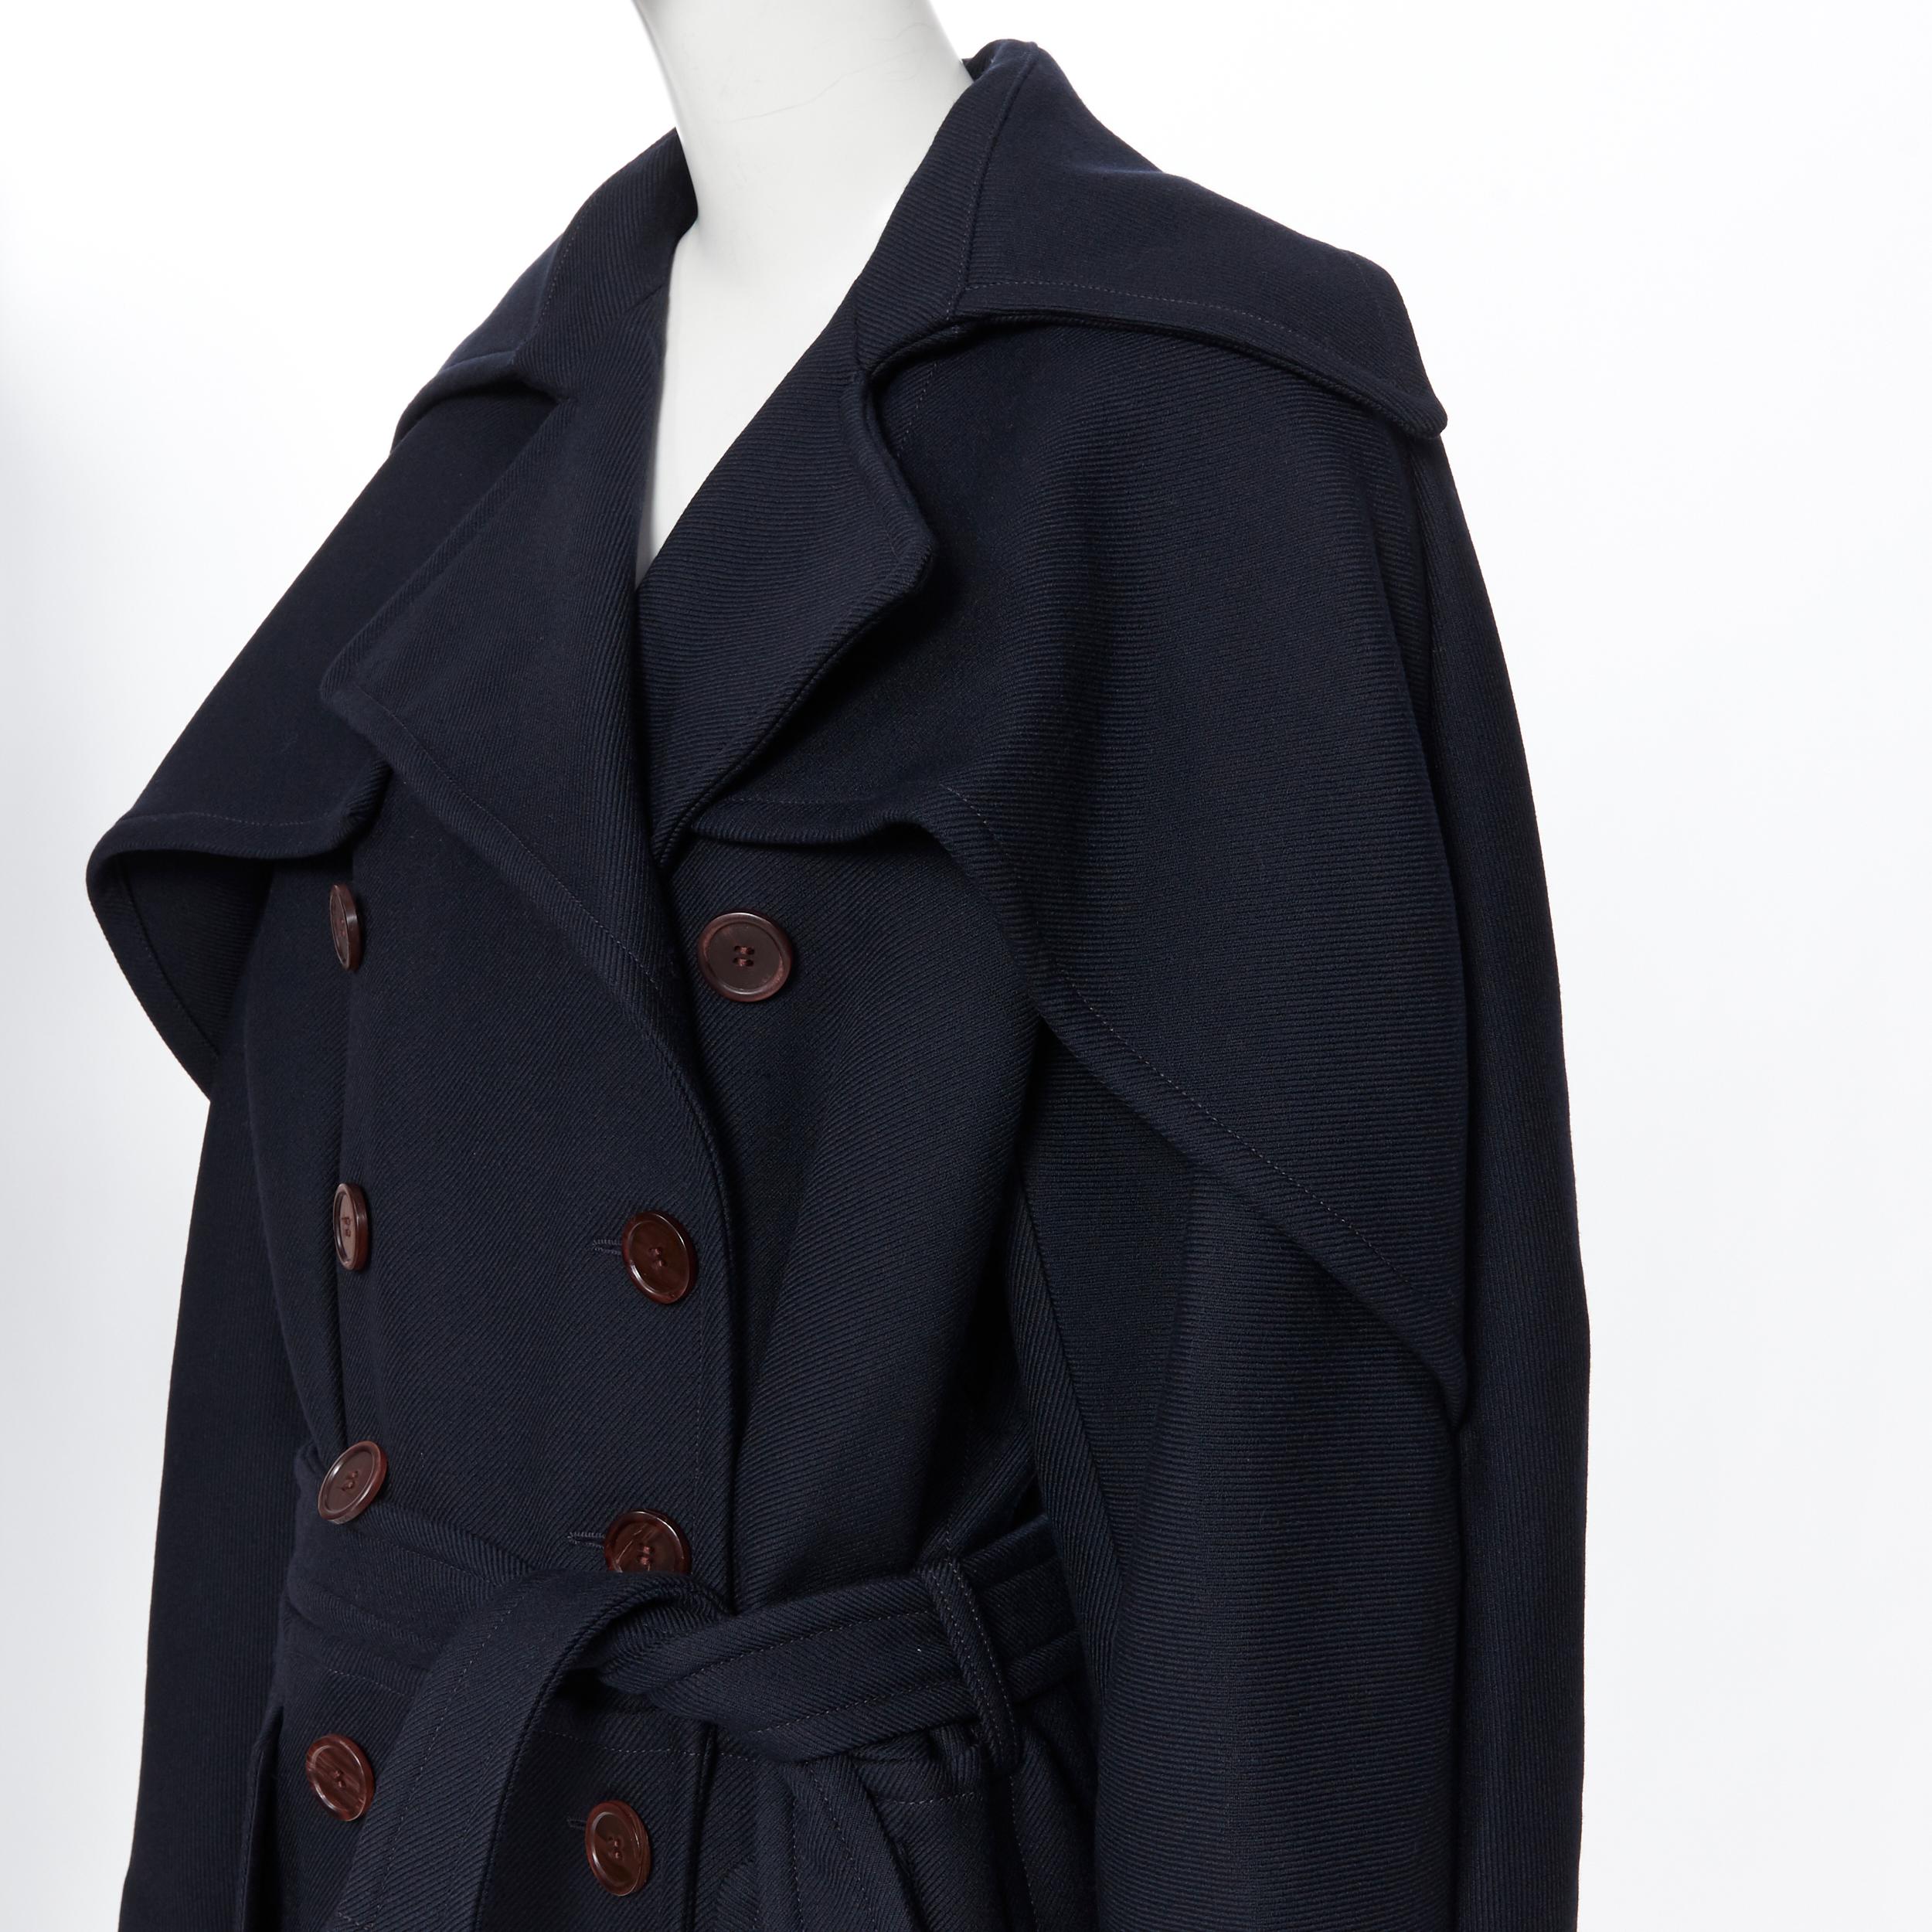 new CHLOE Iconic Navy wool ruffle front double brasted belted trench coat FR36
Brand: Chloe
Model Name / Style: Double breasted coat
Material: Wool
Color: Blue
Pattern: Solid
Closure: Button
Extra Detail: Ruffle detail at front. Fitted seam at